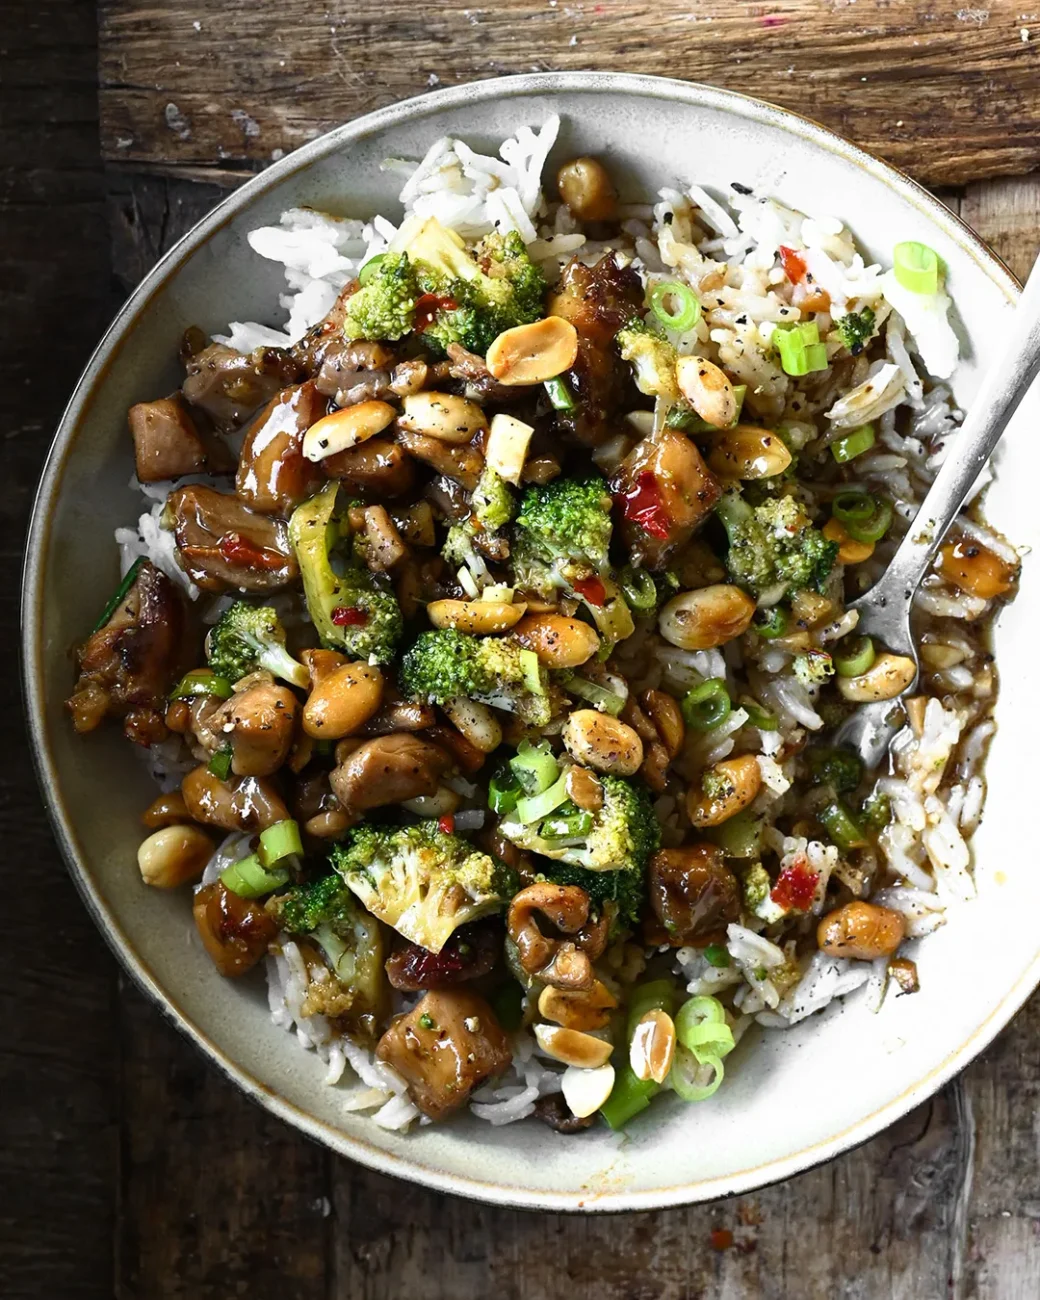 Garlic-Infused Chicken Stir-Fry: A Quick and Flavorful Dinner Idea